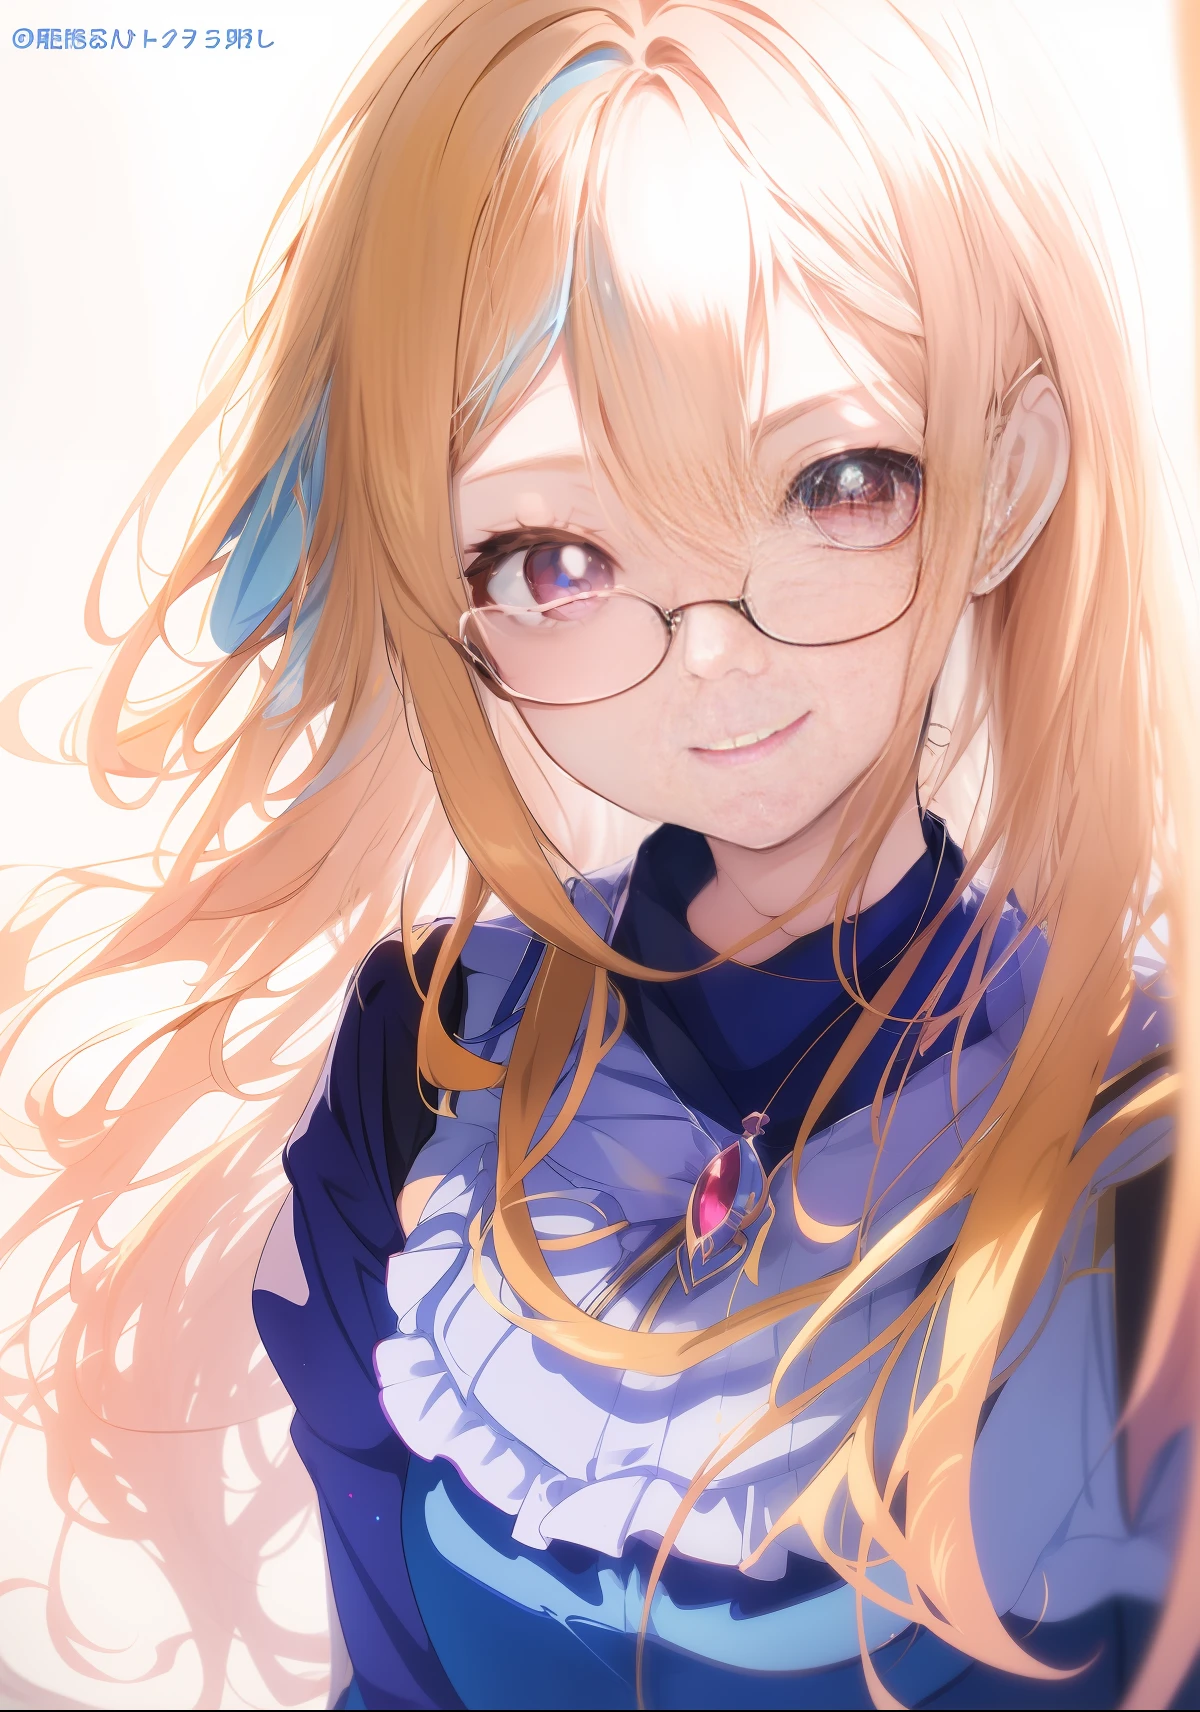 HD soft anime girl wallpapers | Peakpx